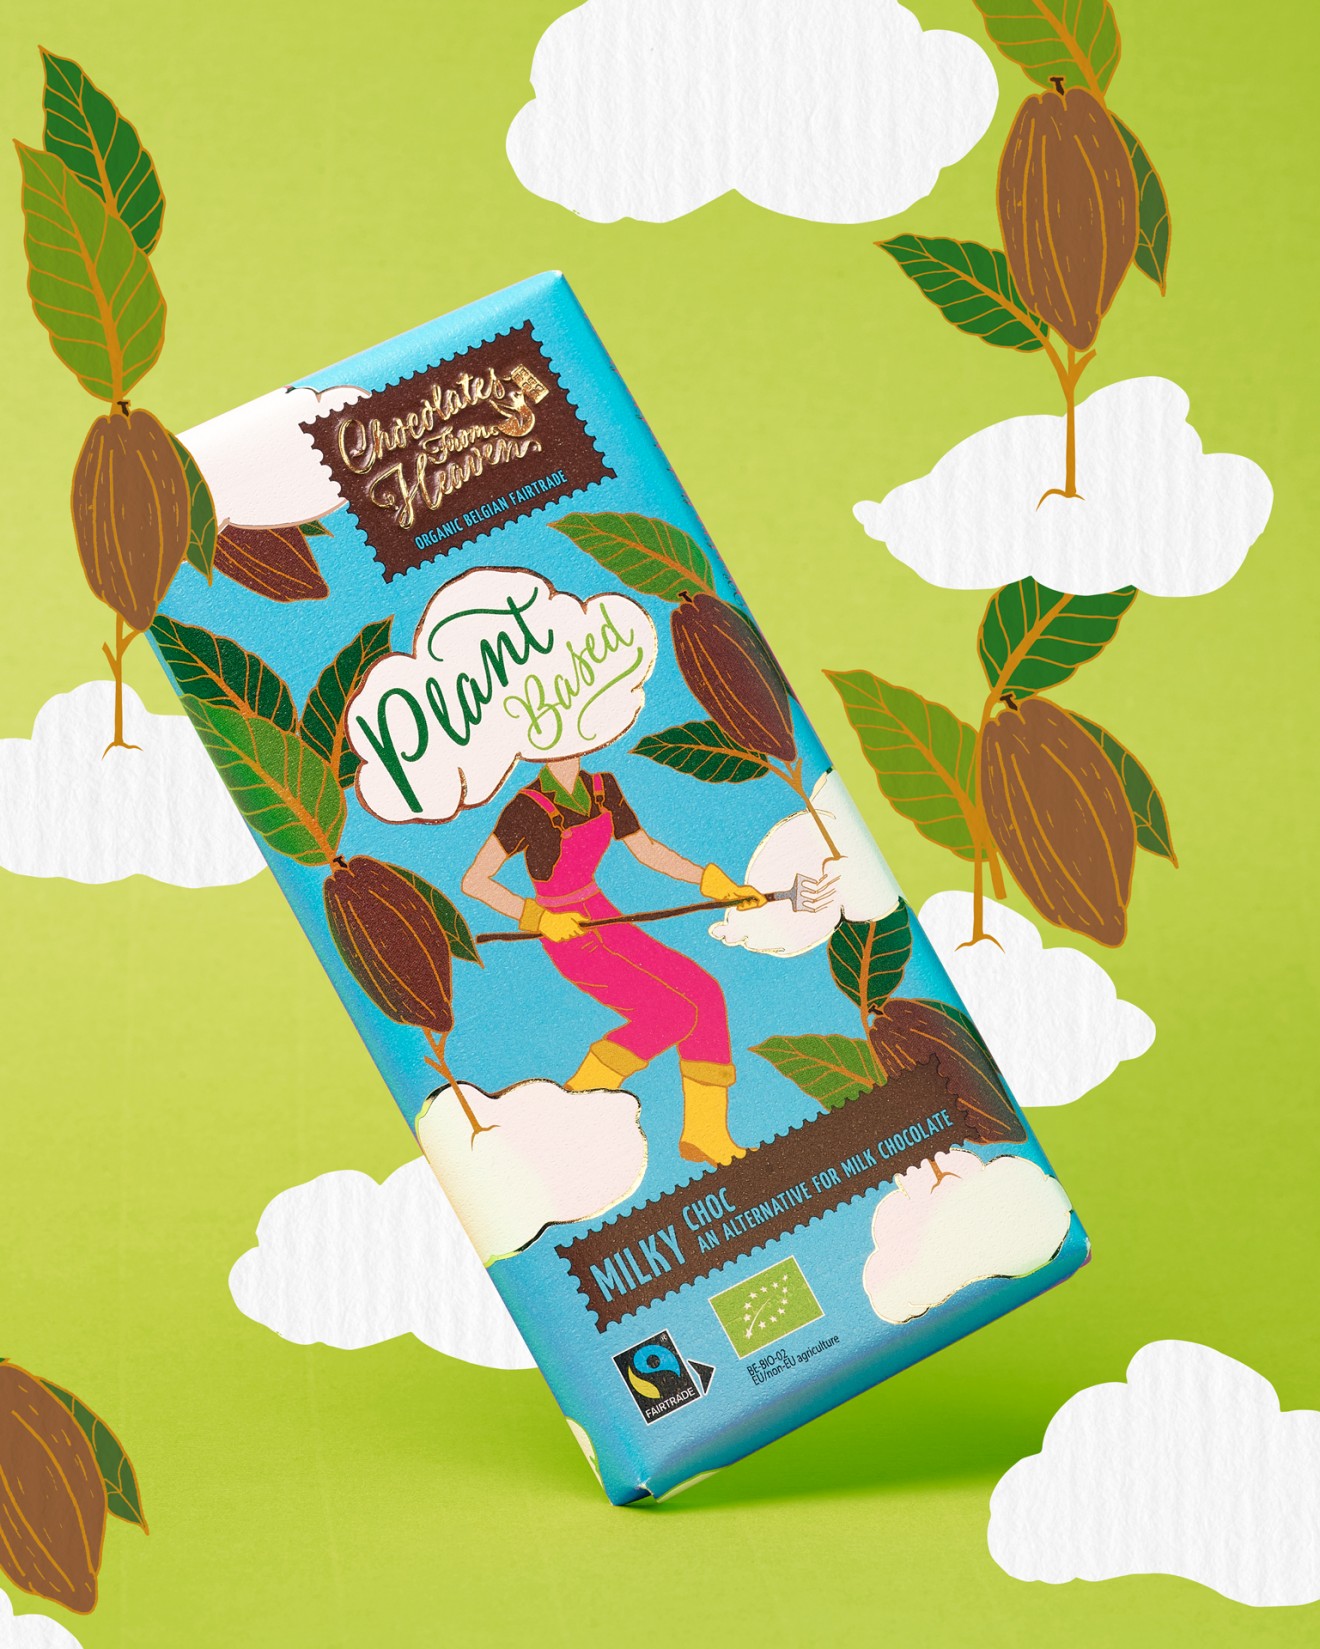 Quatre Mains package design - chocolate, packaging, plant-based, illustration, heaven, dreamy